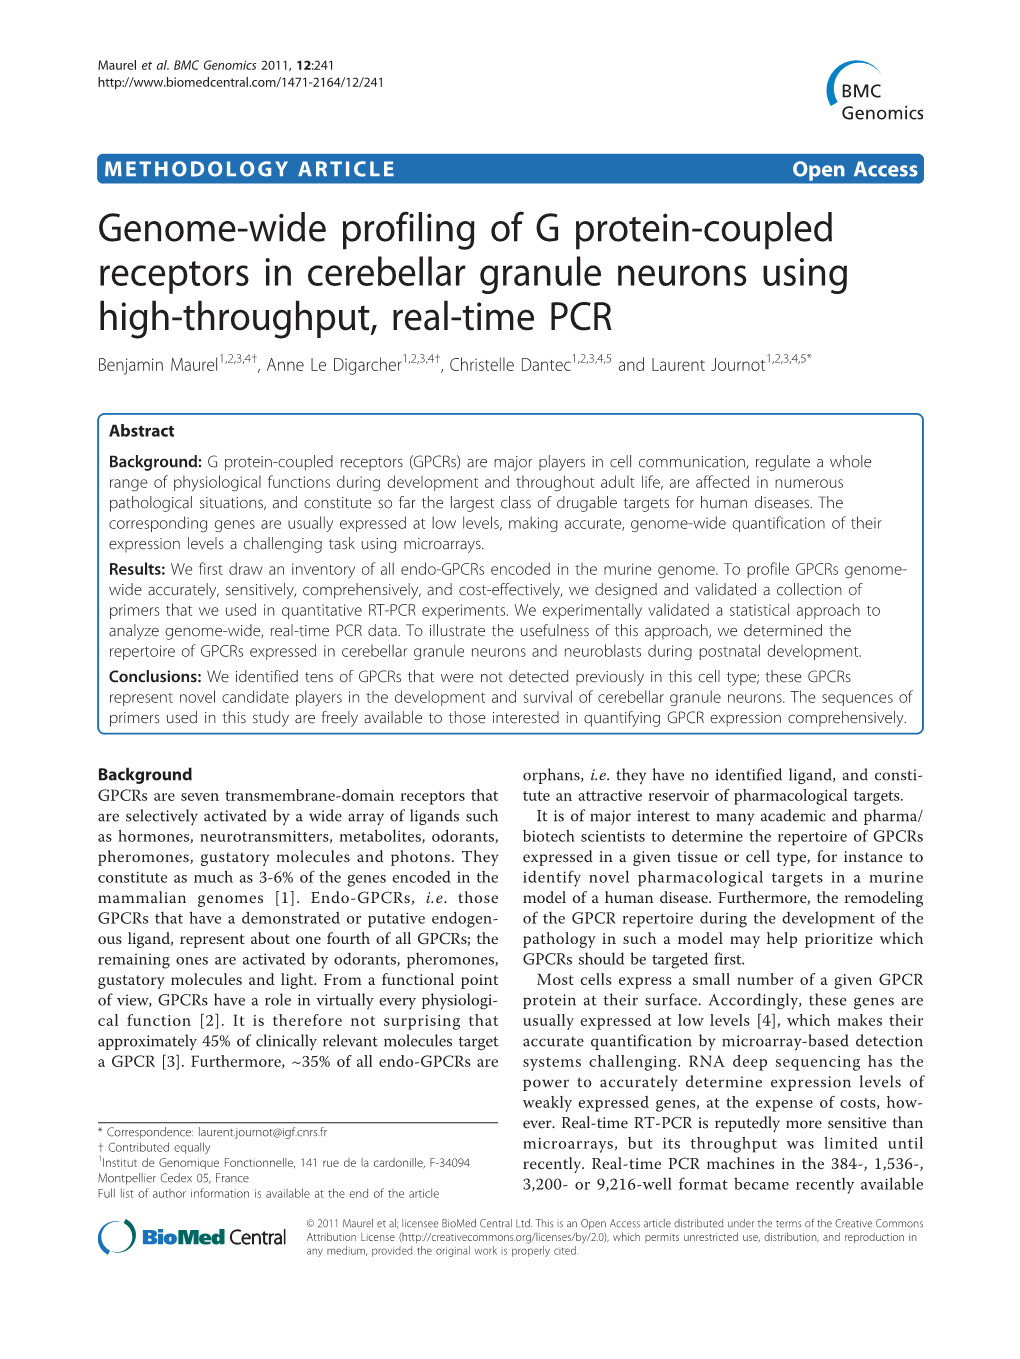 Genome-Wide Profiling of G Protein-Coupled Receptors In